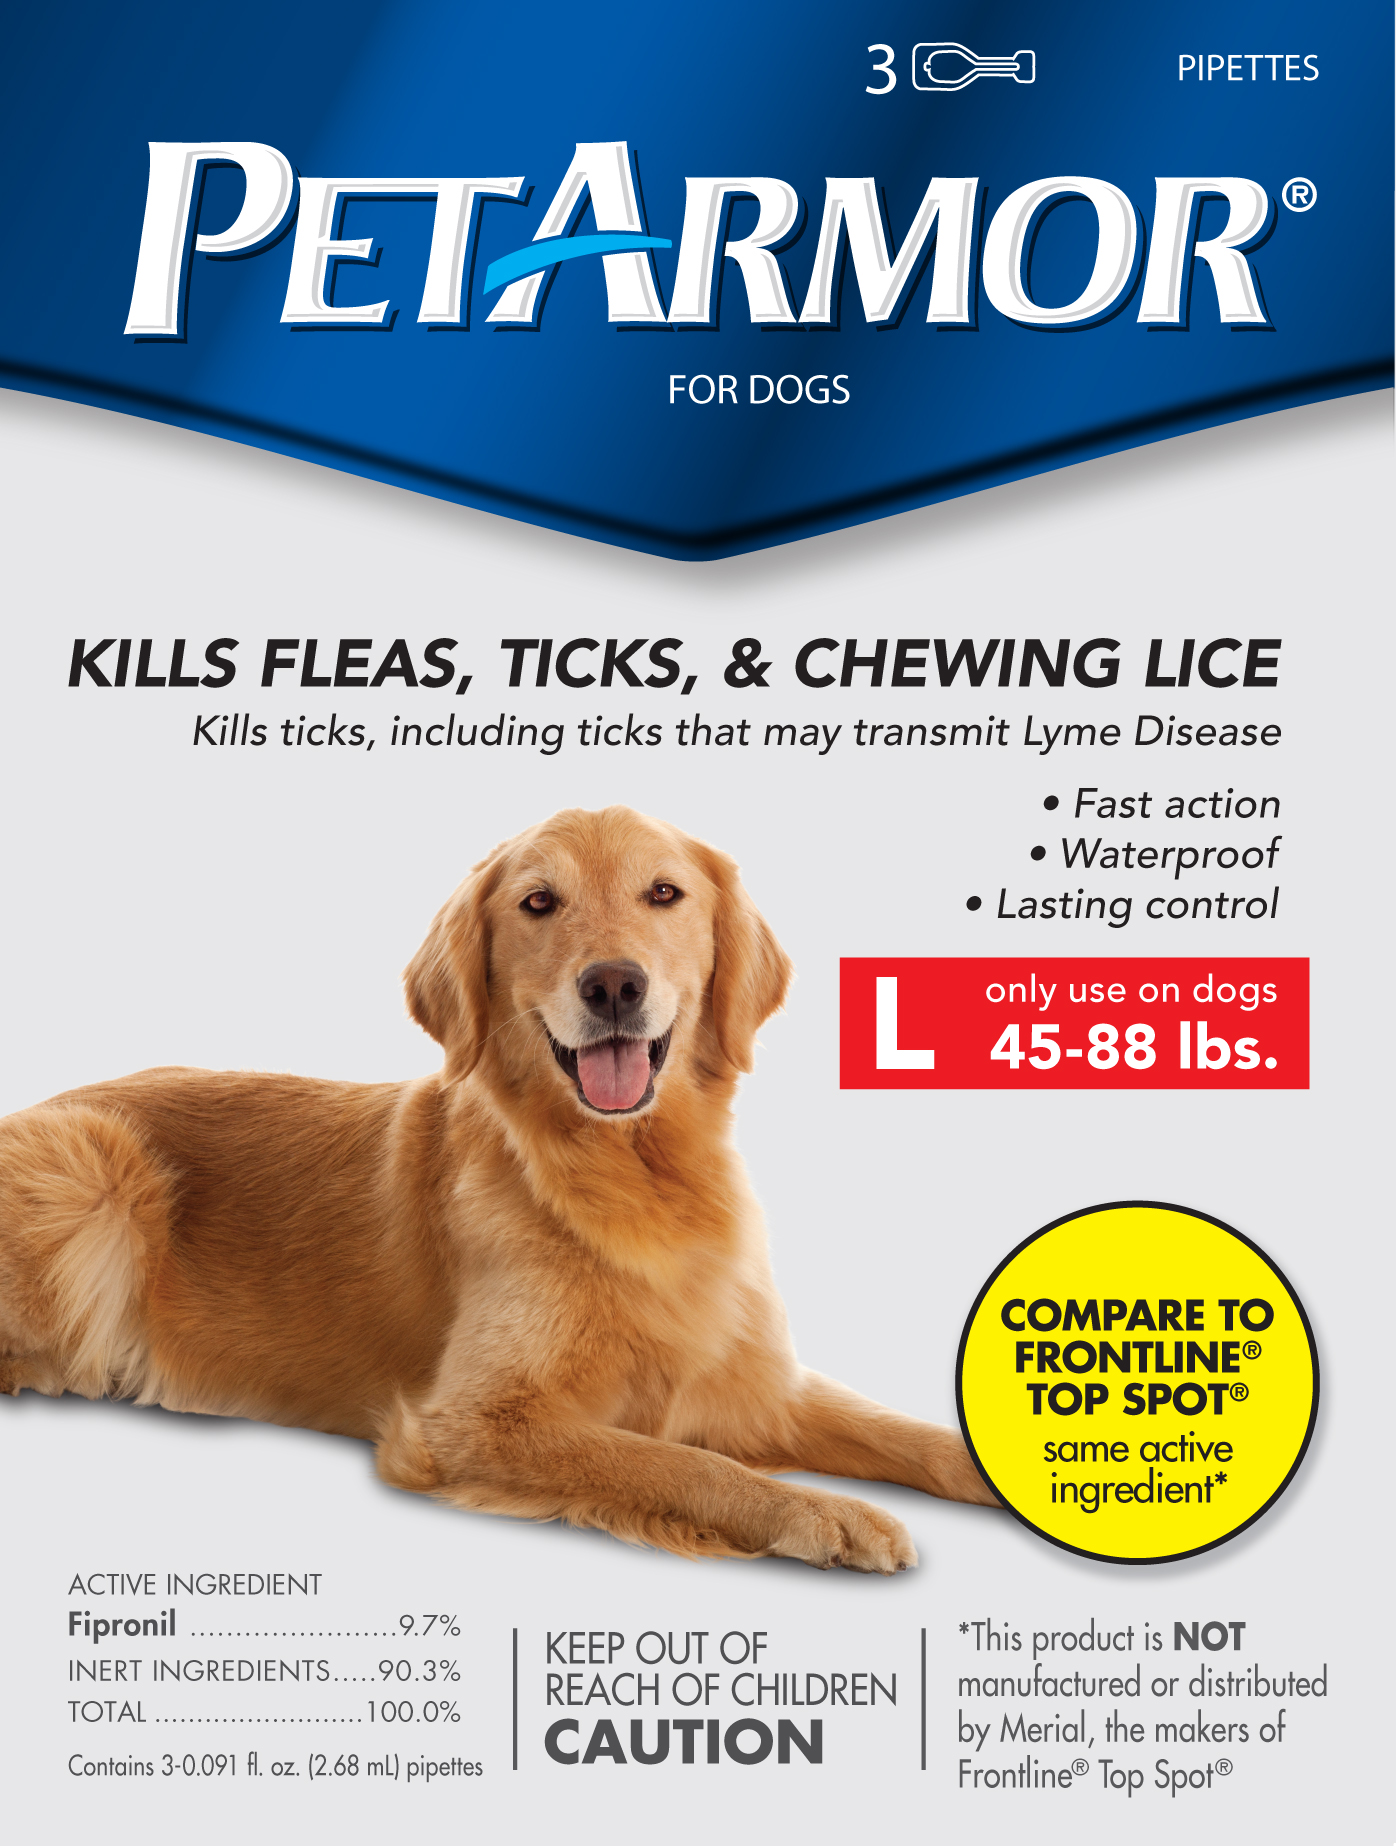 Protect your Pet with PetArmor Yesterday On Tuesday